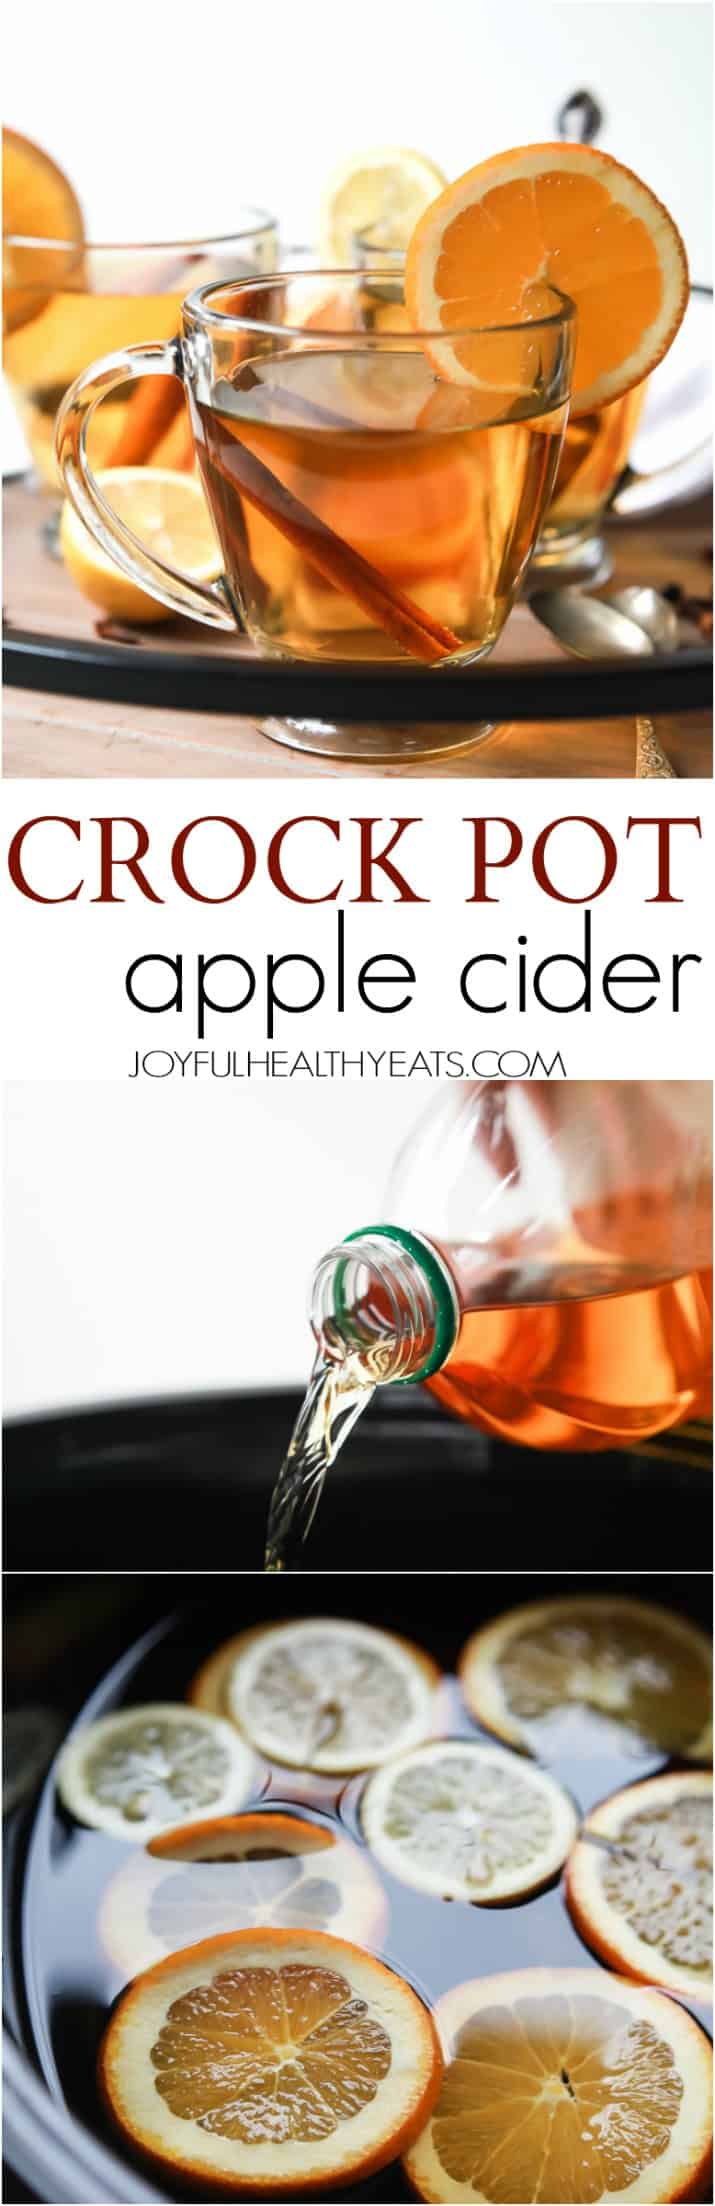 This Crock Pot Apple Cider is the perfect drink to have in your hand this holiday season. It's easy, delicious, comforting, and makes your house smell amazing! | joyfulhealthyeats.com